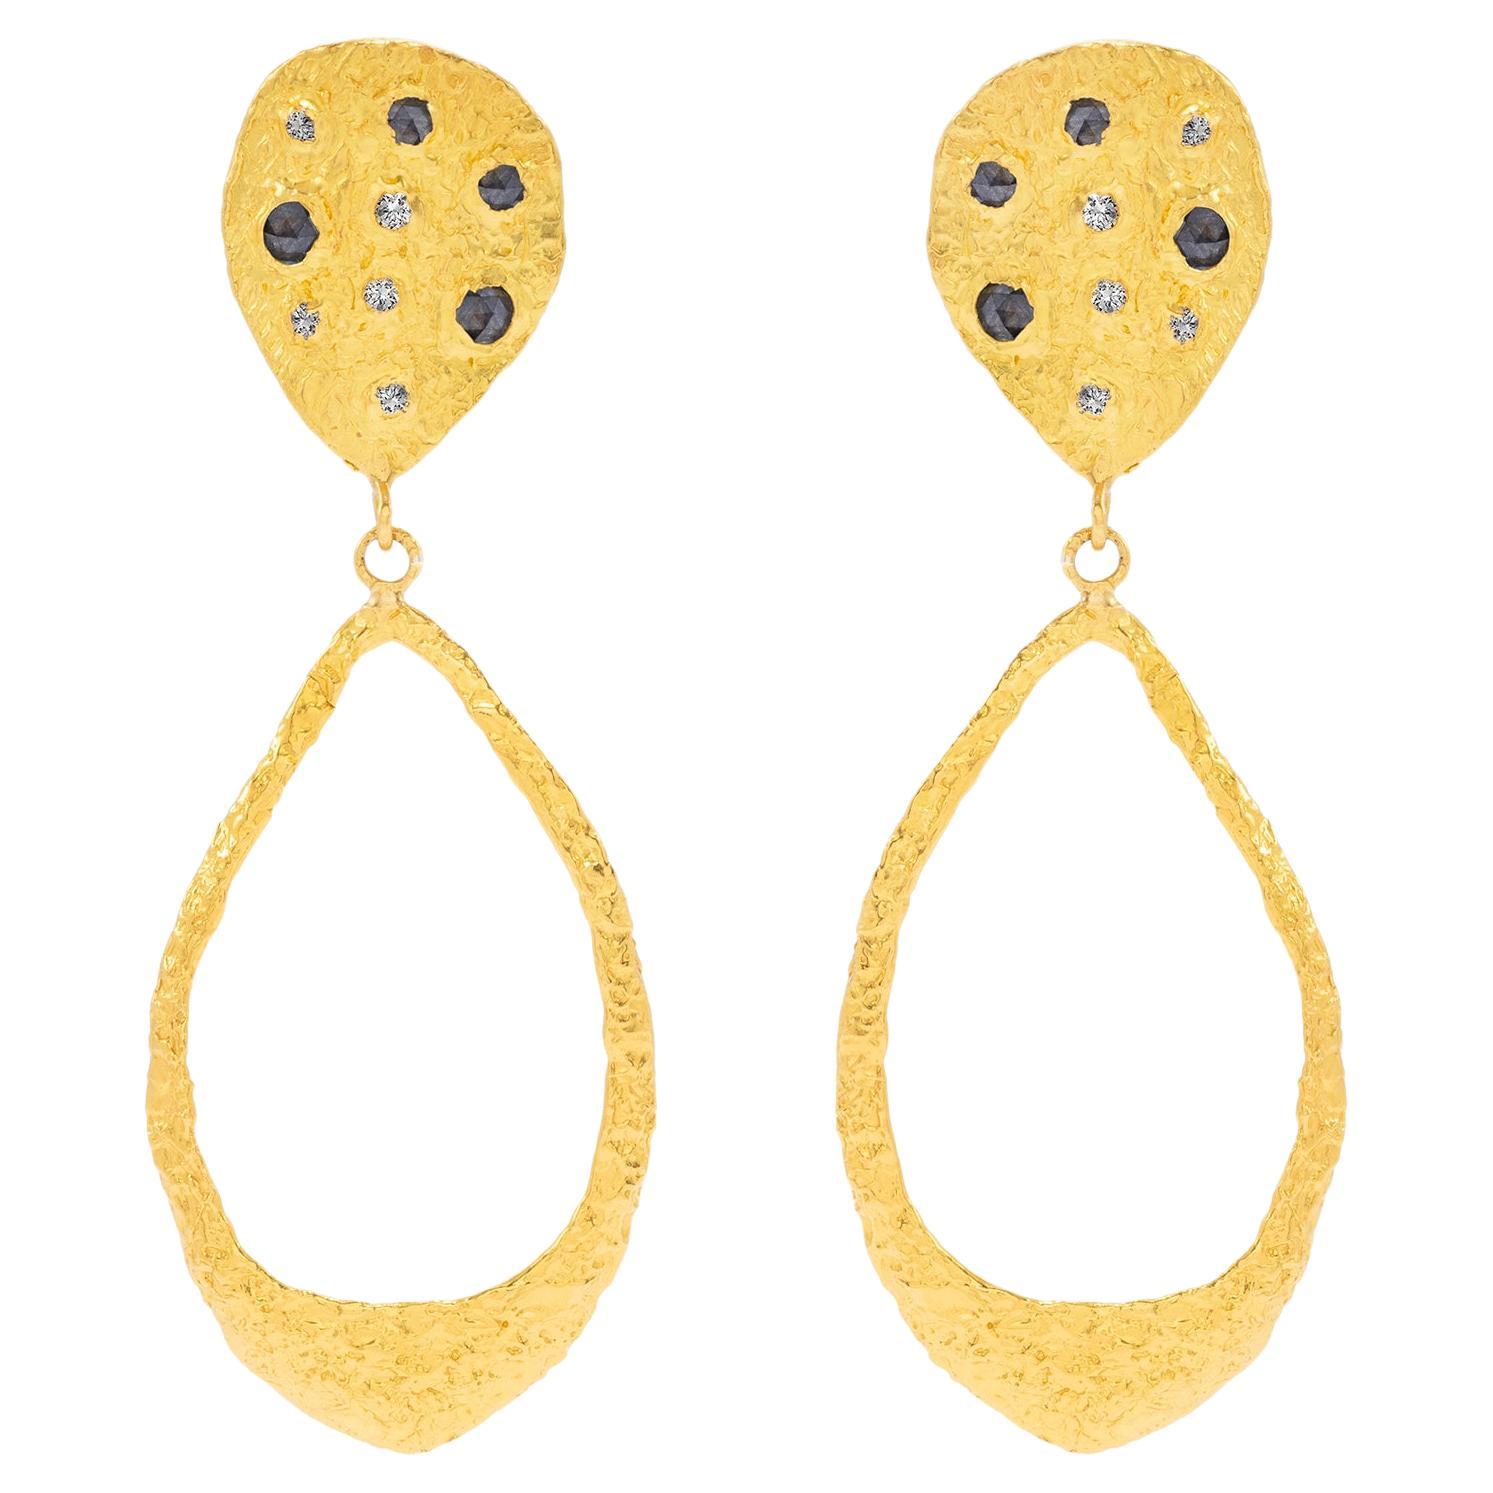 Signature Teardrop Earrings with Diamonds in 22k Gold, by Tagili